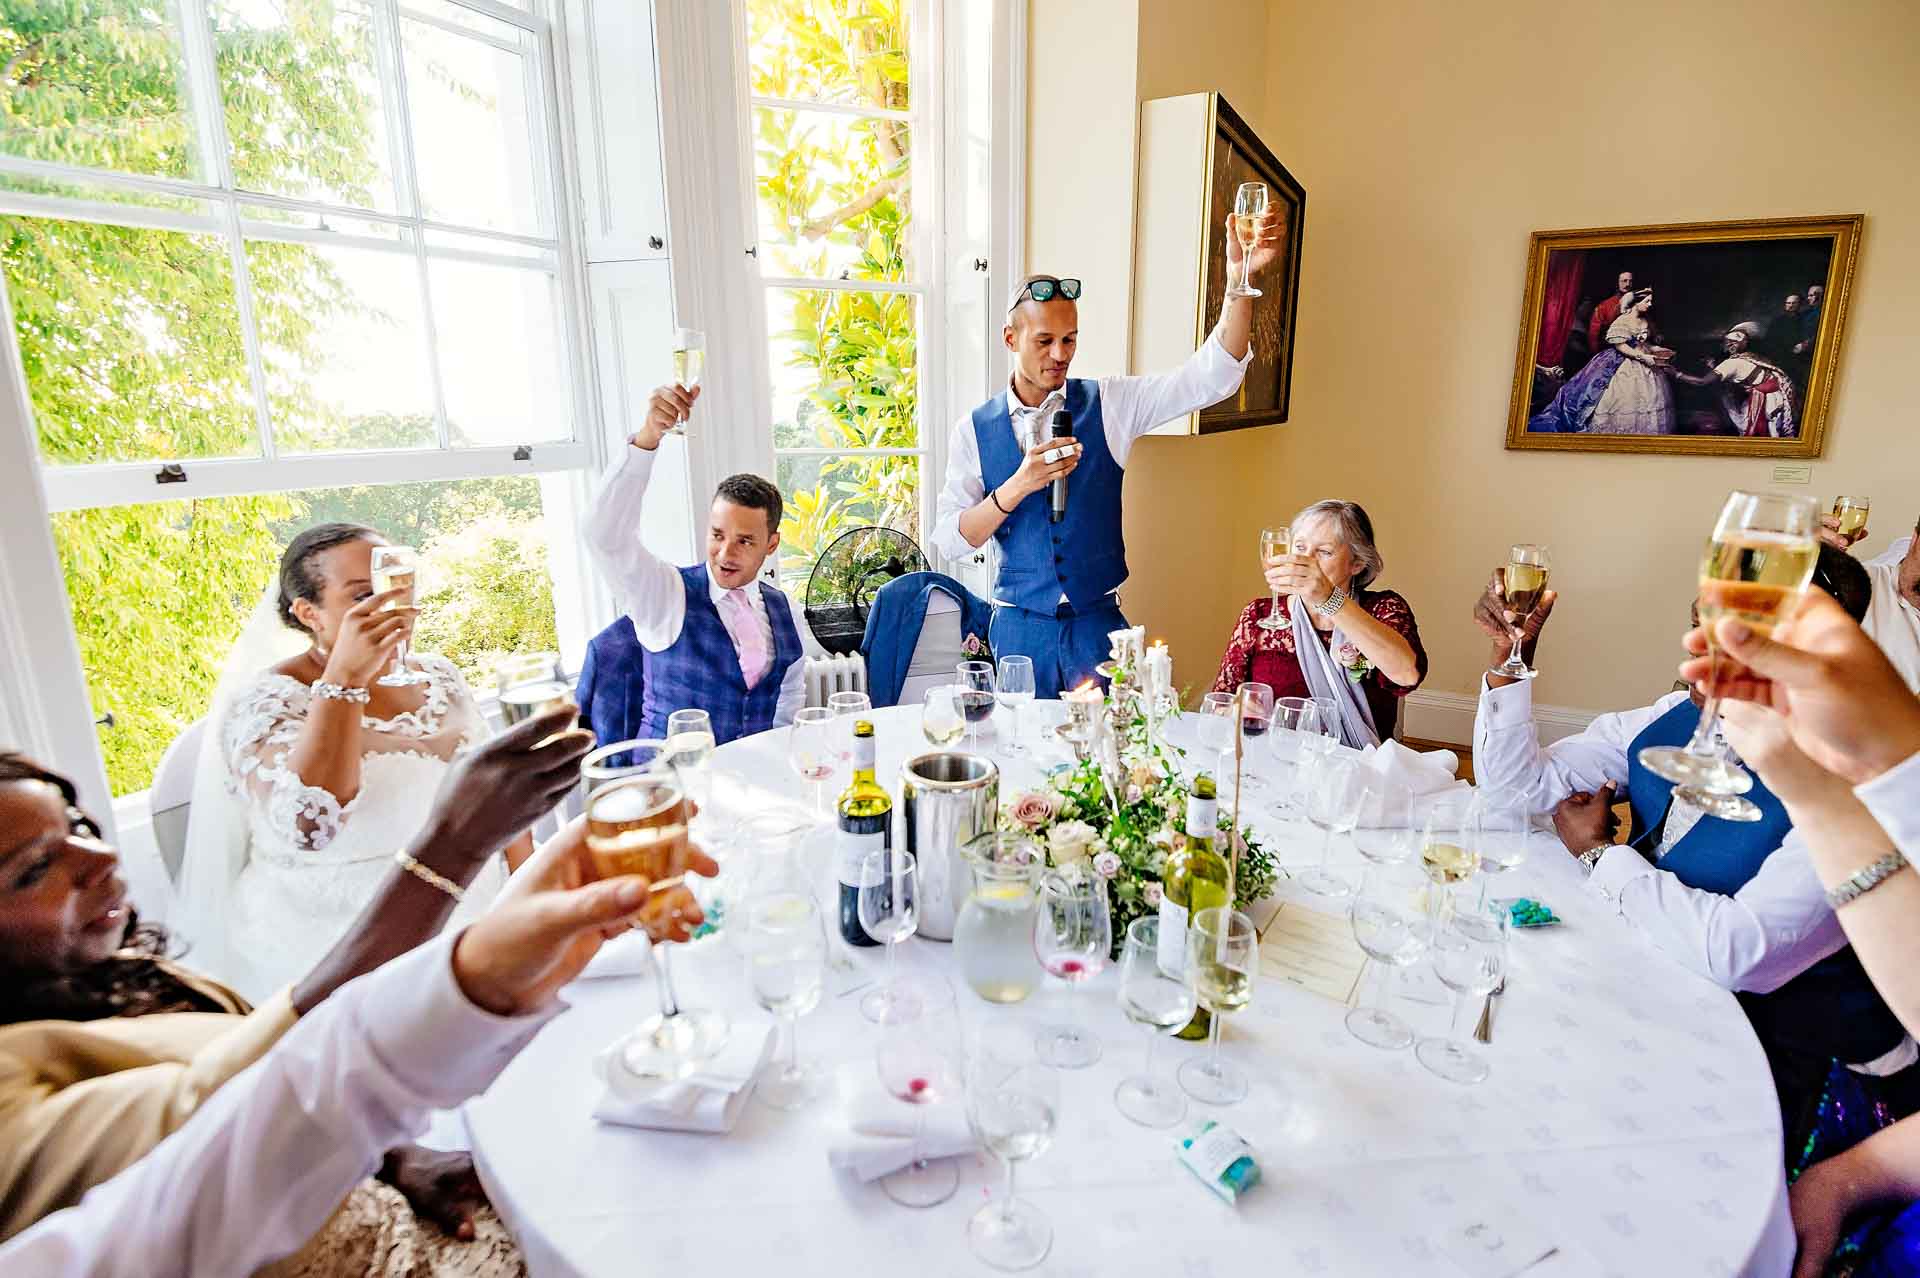 Guests Toasting Bride and Groom at Wedding Breakfast Speeches